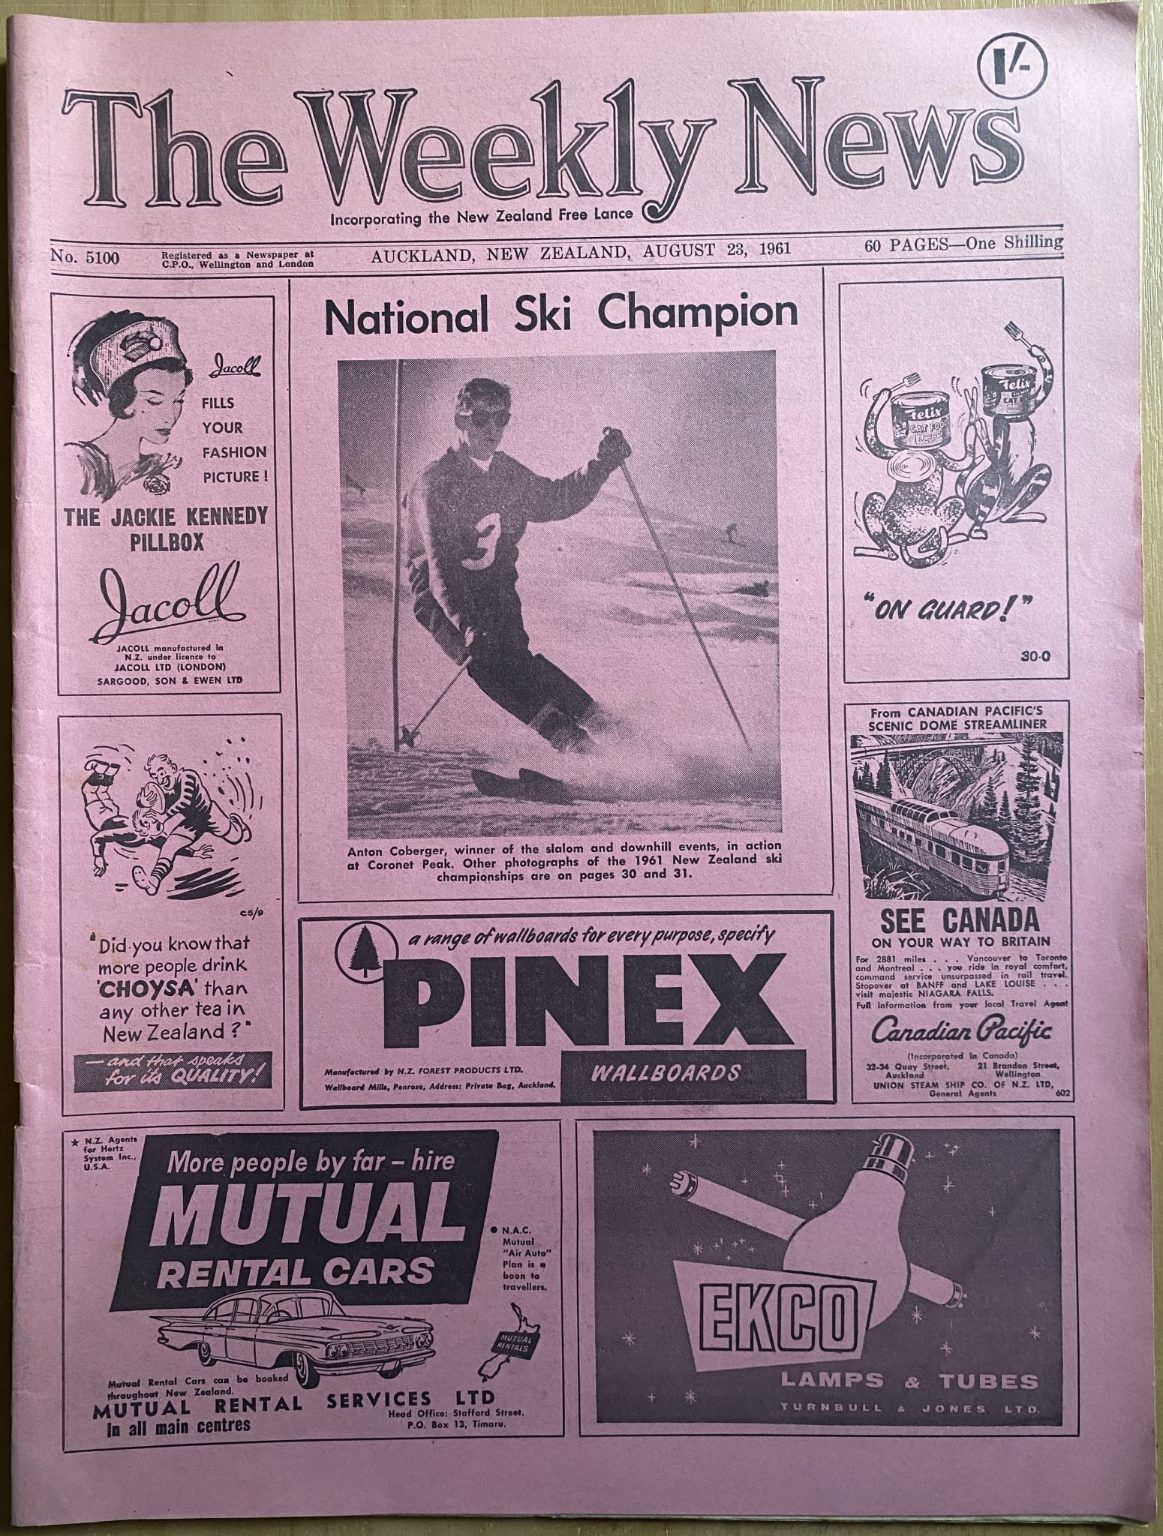 OLD NEWSPAPER: The Weekly News, No. 5100, 23 August 1961